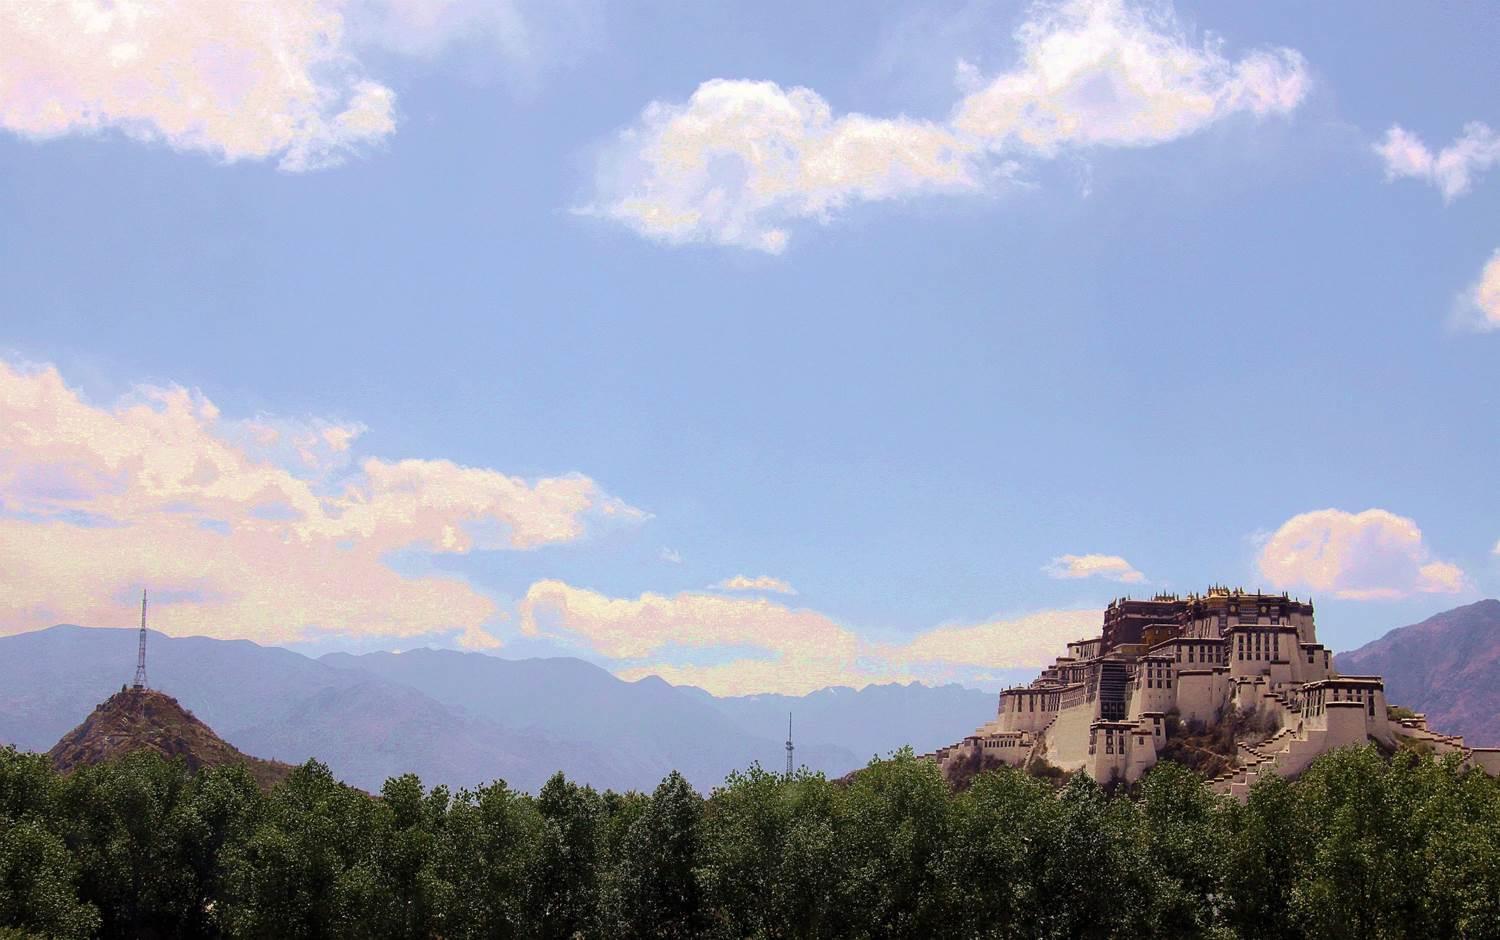 In a regular morning of May, Lhasa people begin a new day as usual.